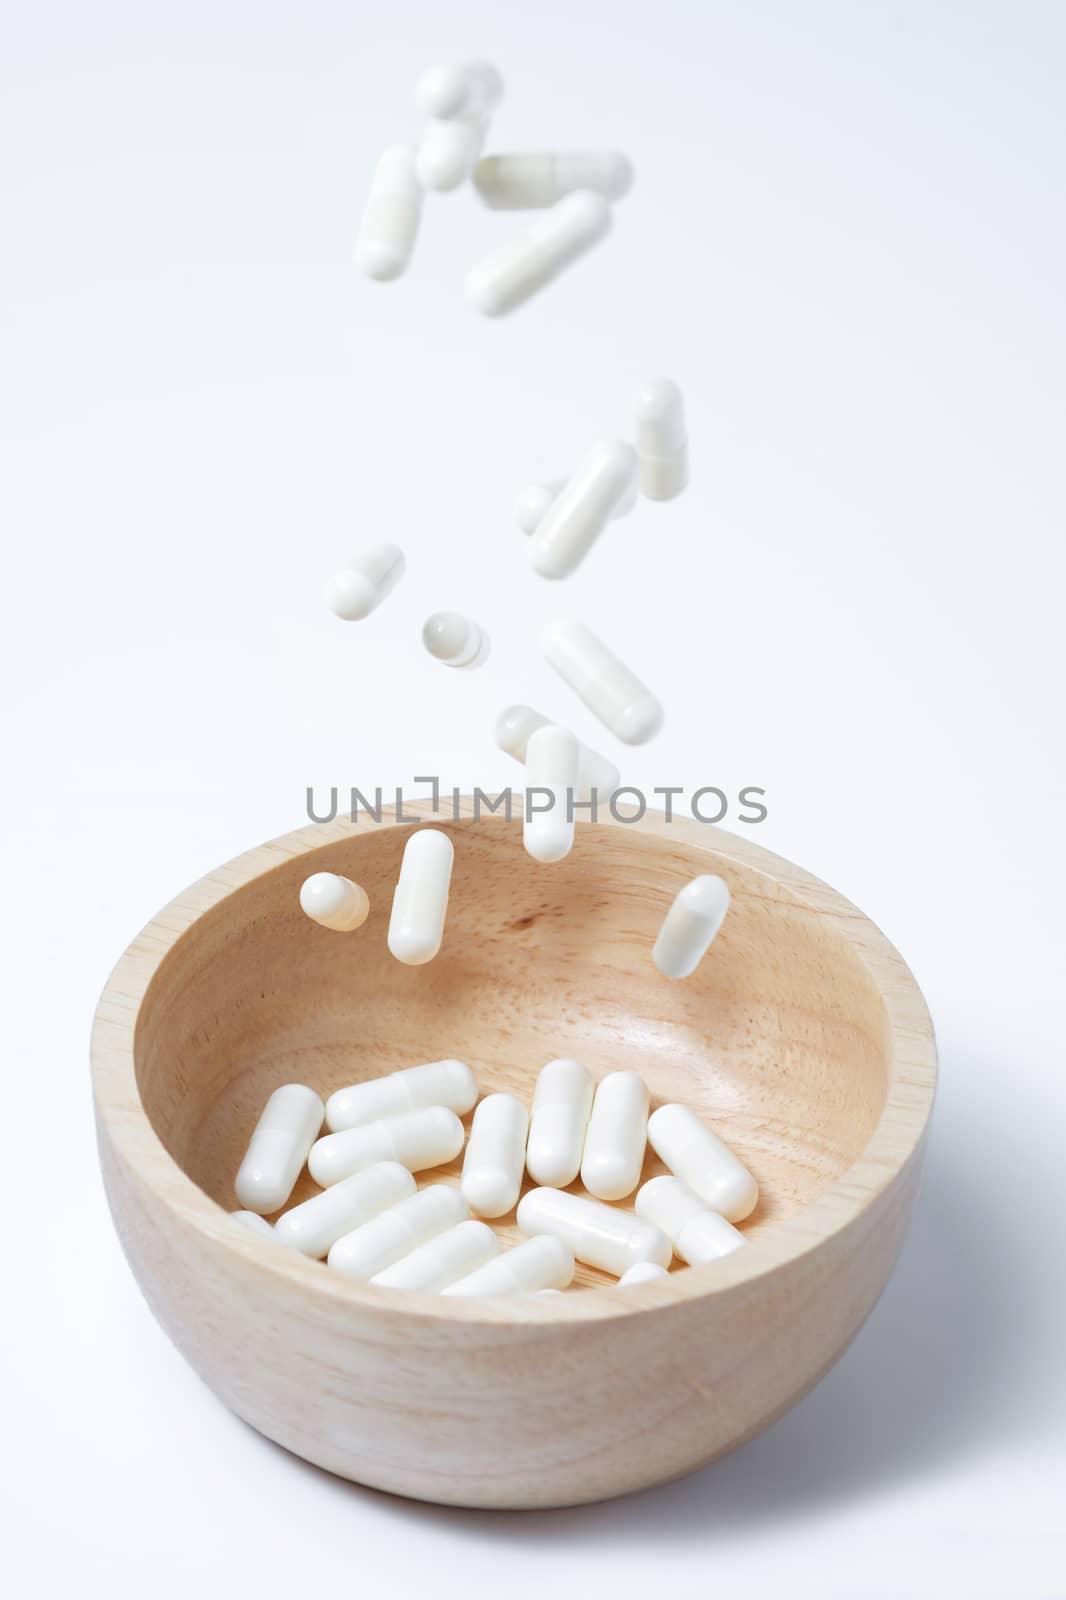 falling of white capsules medicine or vitamin in to wooden bowl